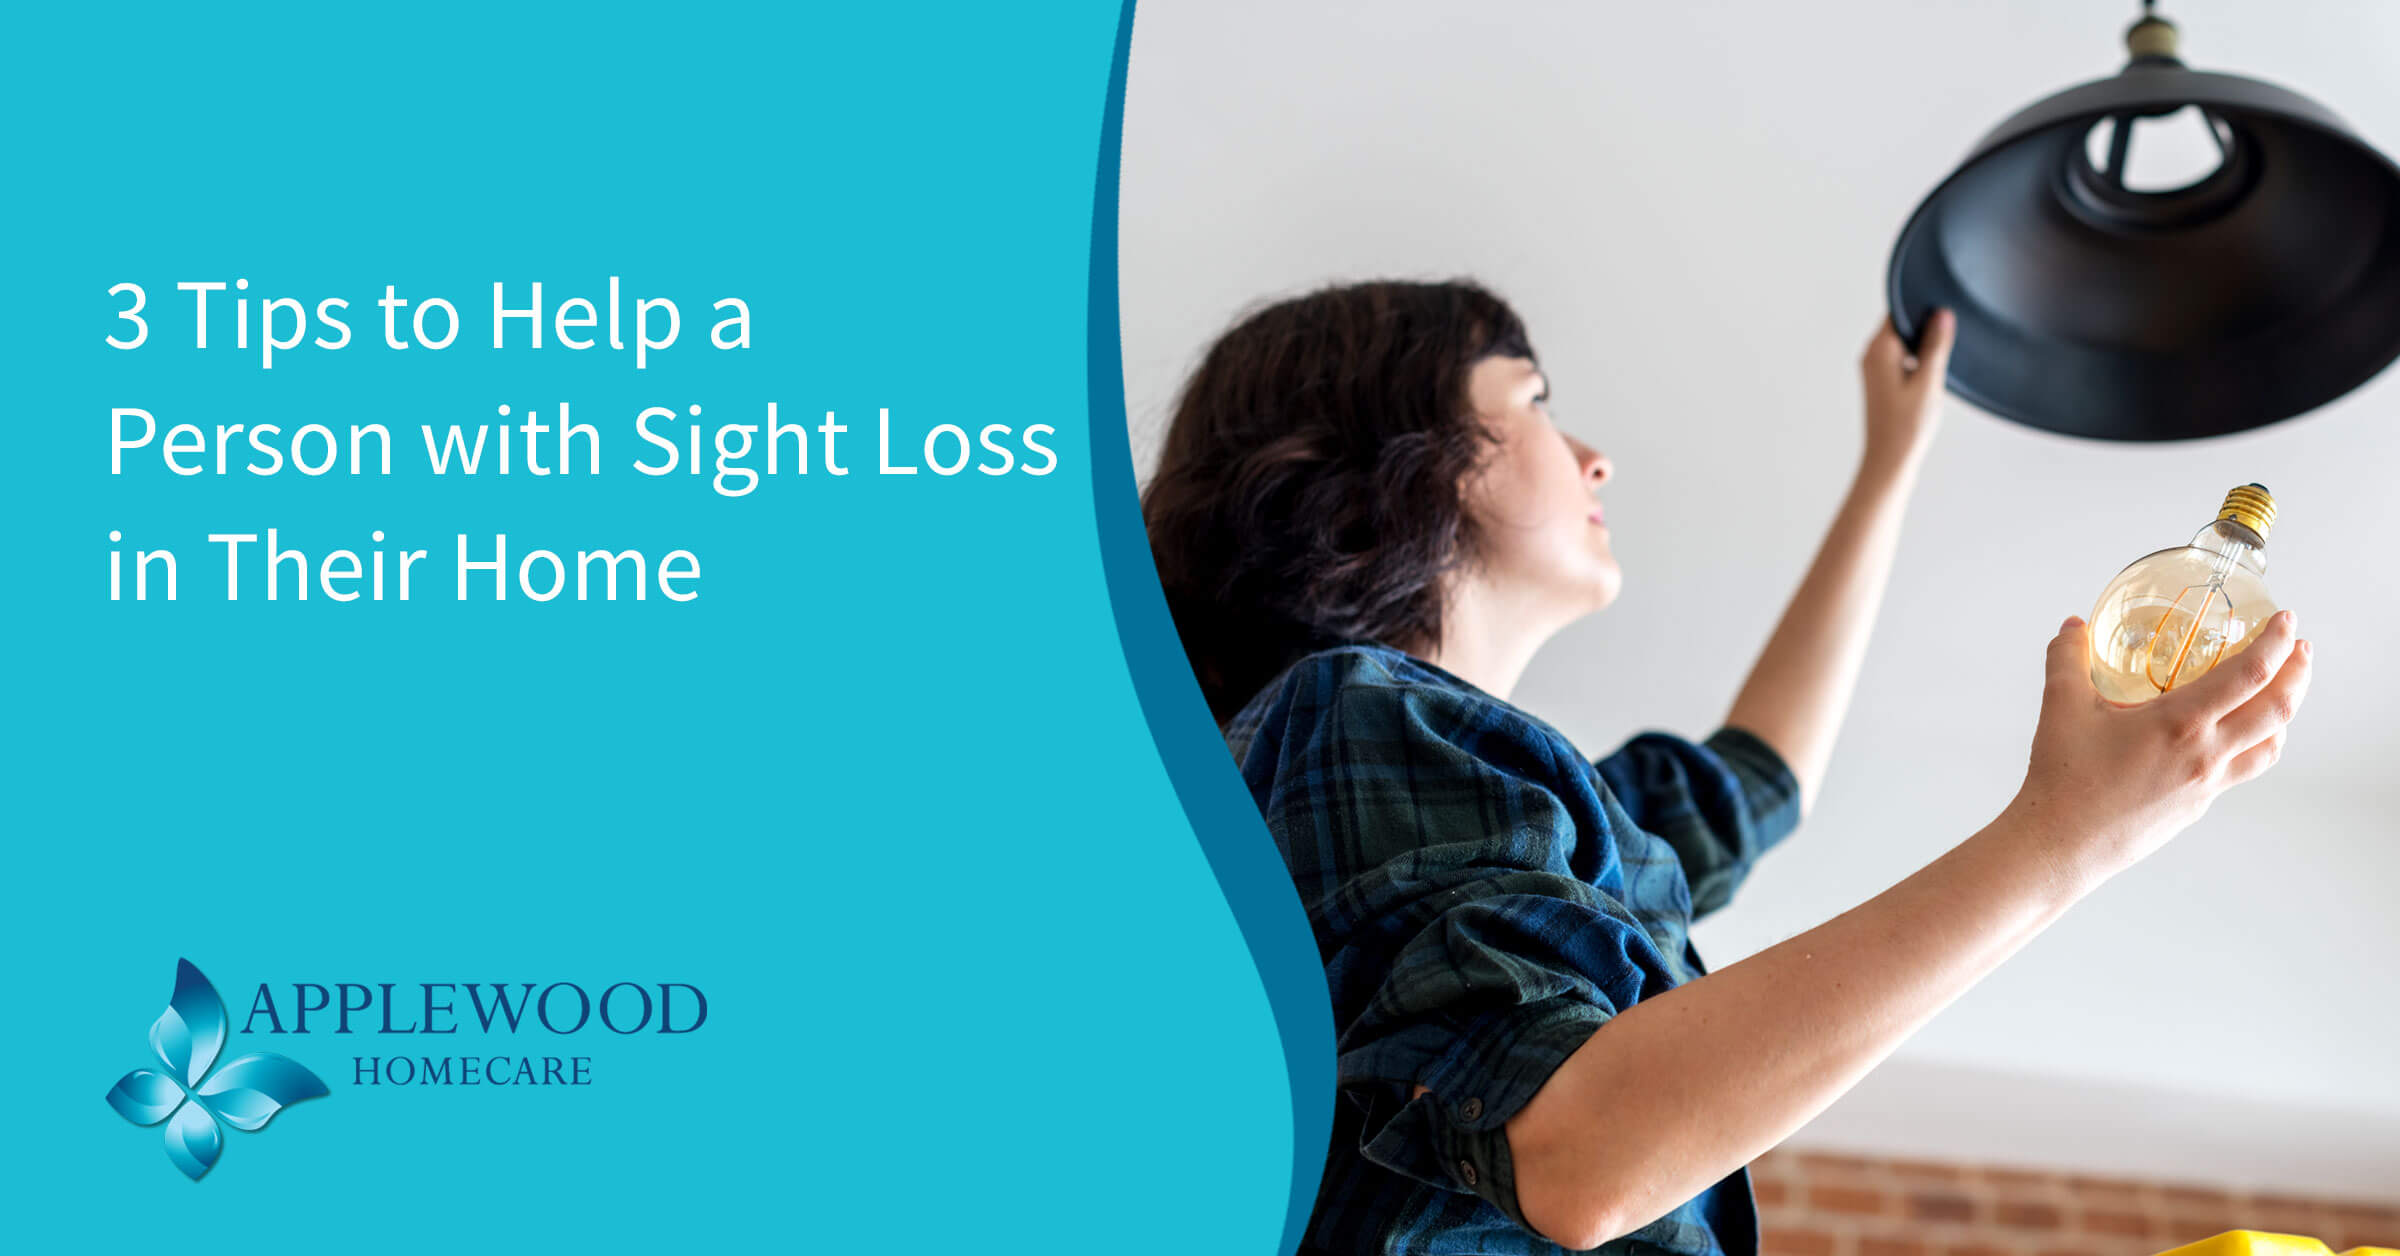 3 Tips to Help a Person with Sight Loss in Their Home